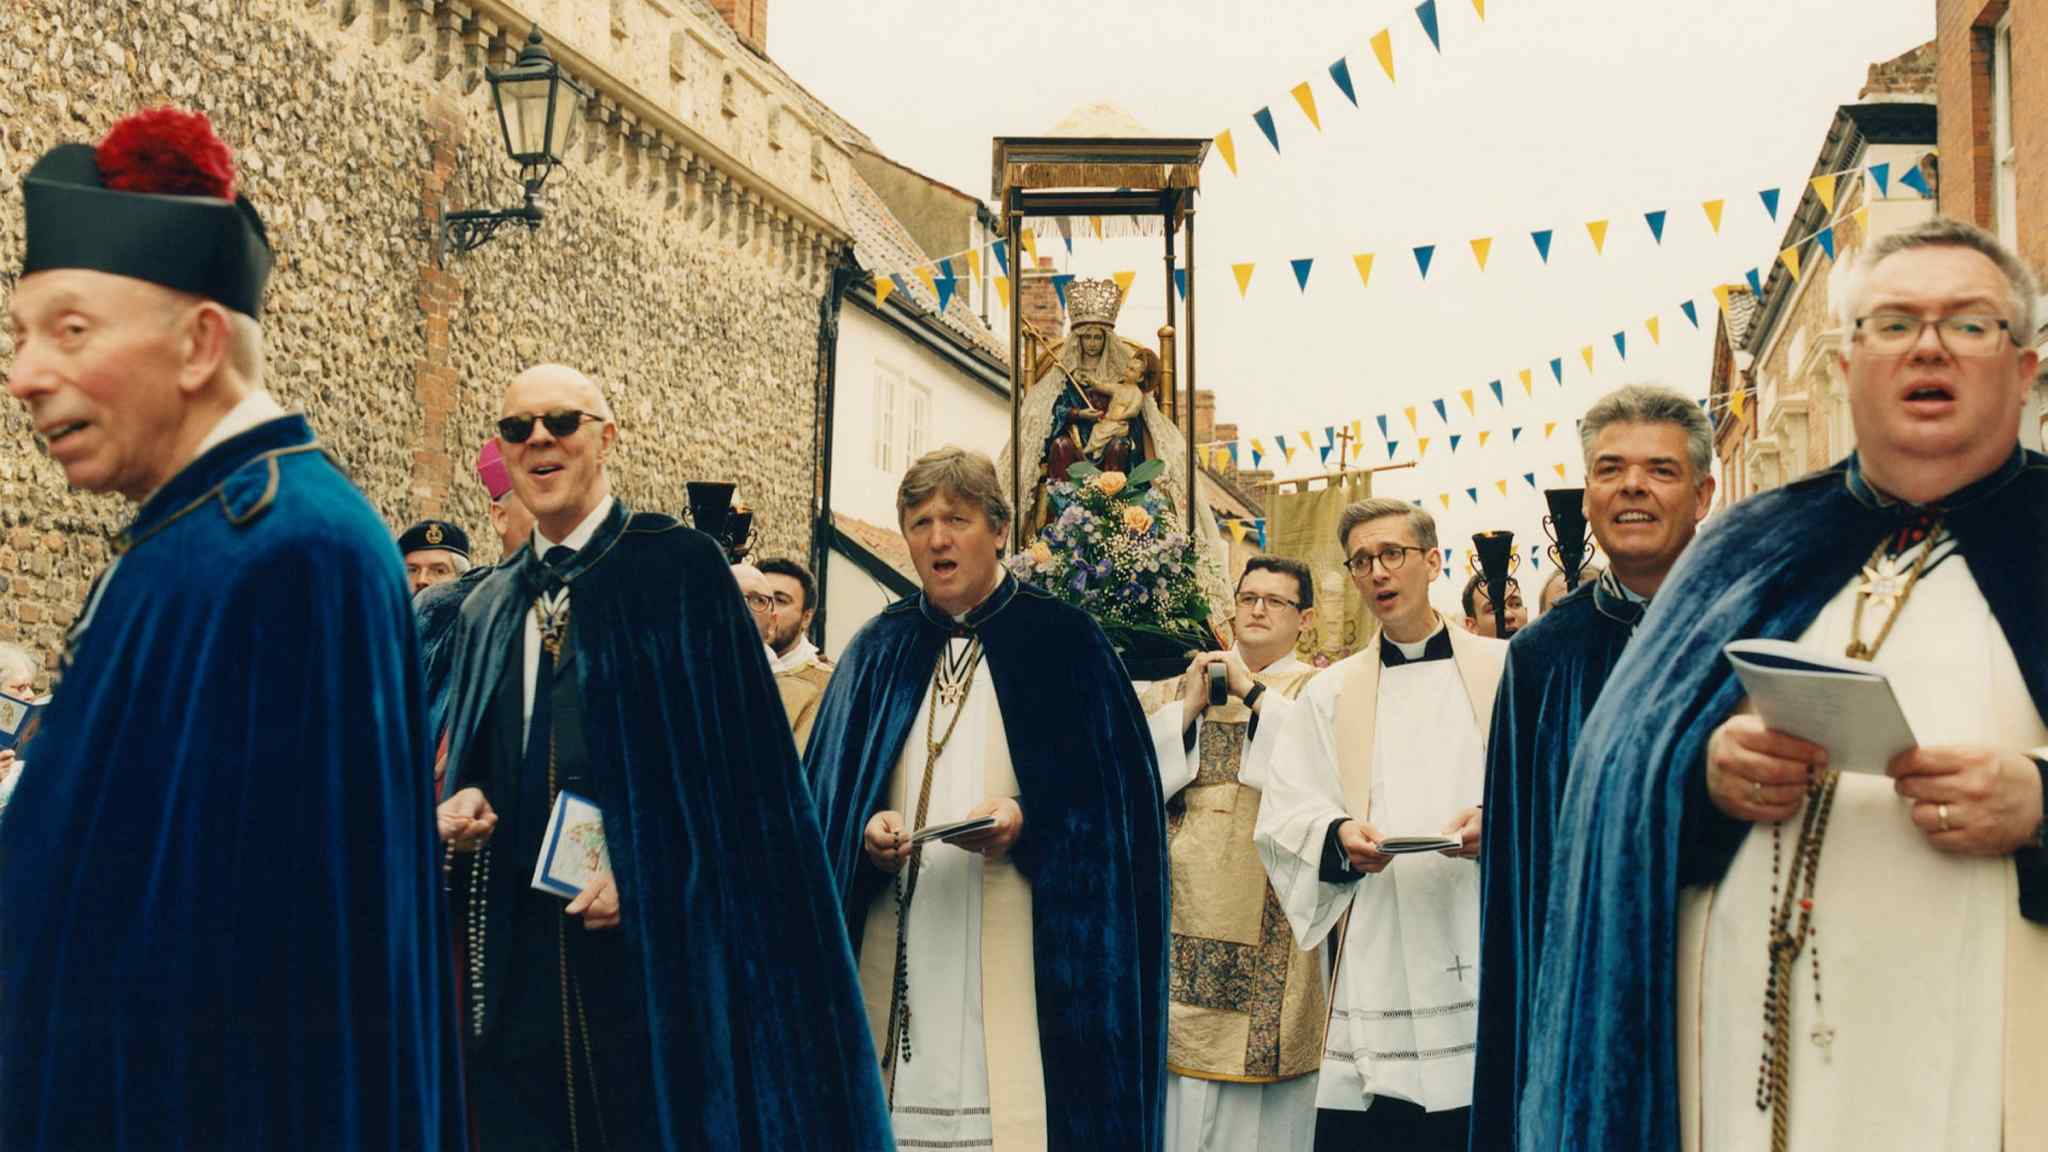 The Norfolk Lourdes: England’s lost Holy Land